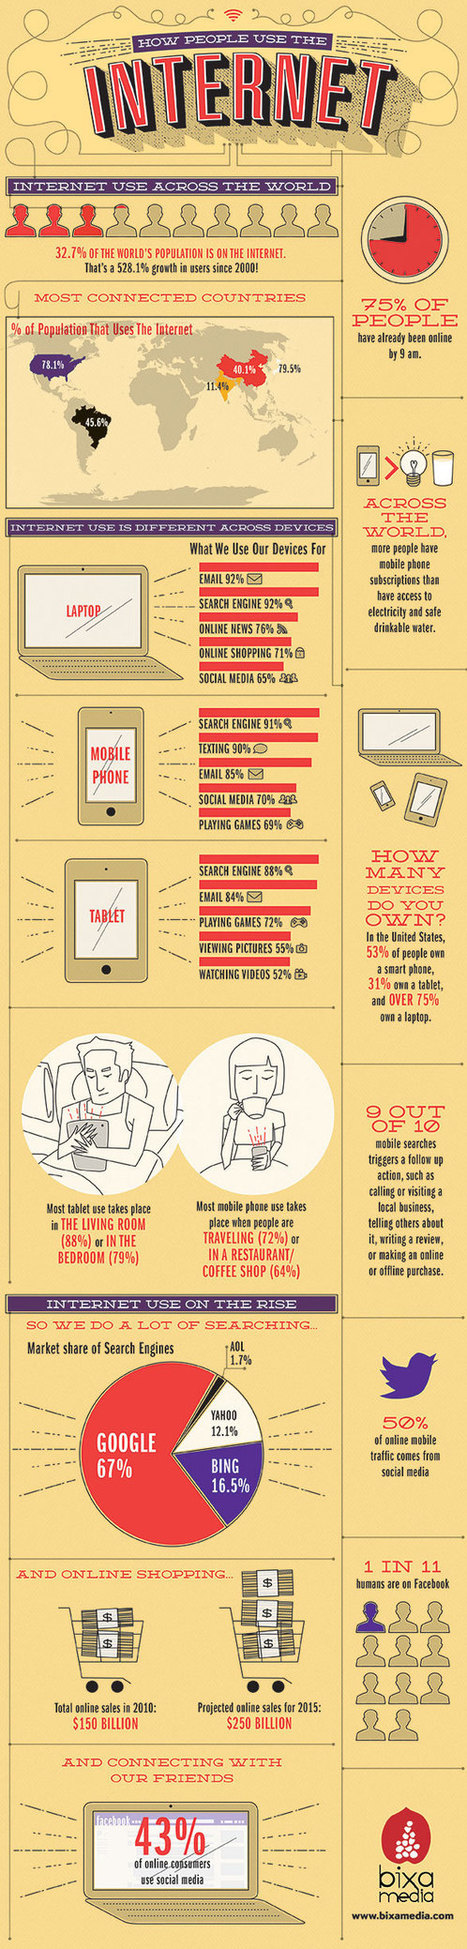 How People Use the Internet [INFOGRAPHIC] | Design, Science and Technology | Scoop.it